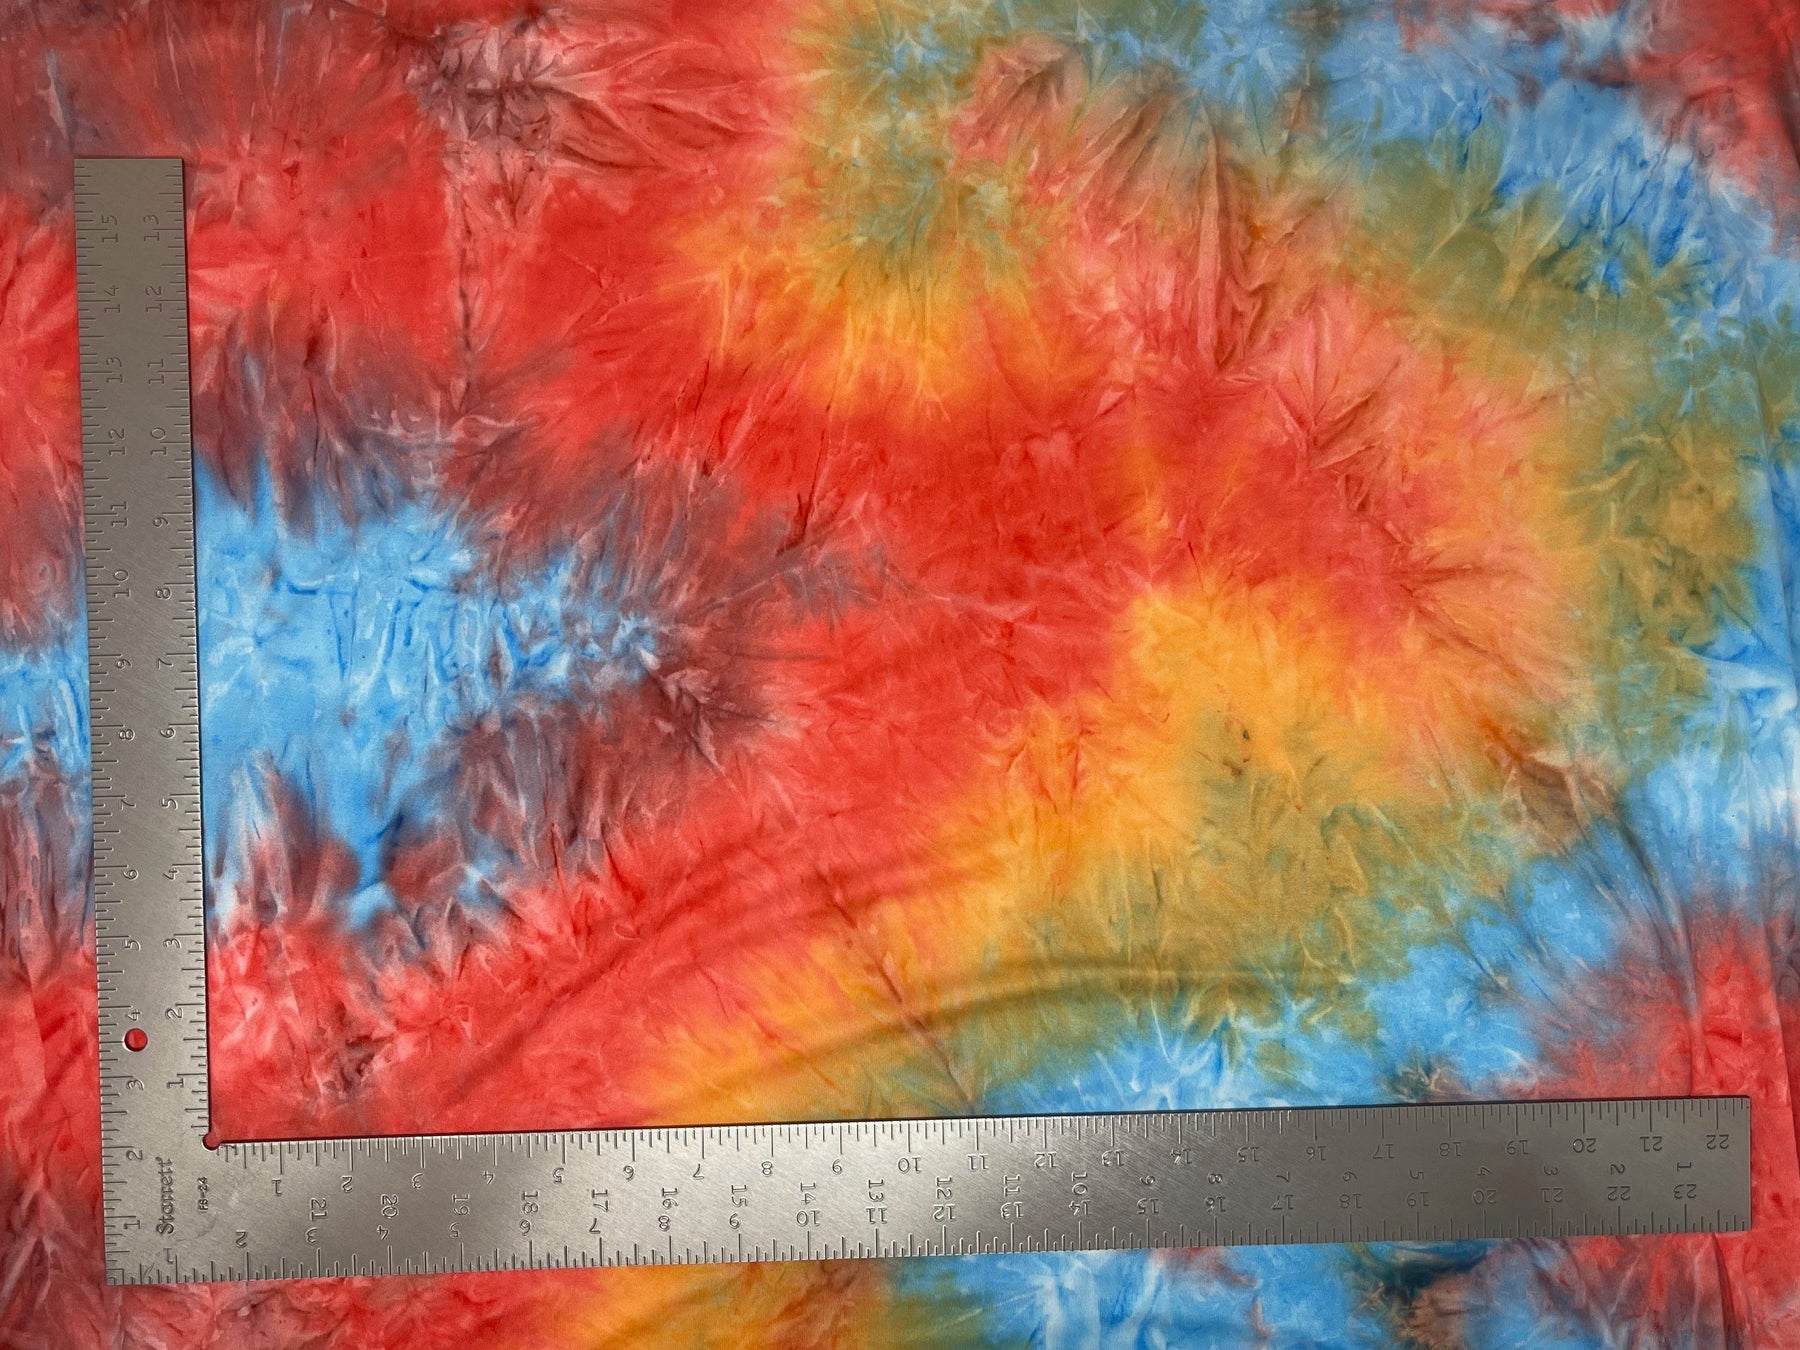 Tie Dye - Red Orange and Yellow 013